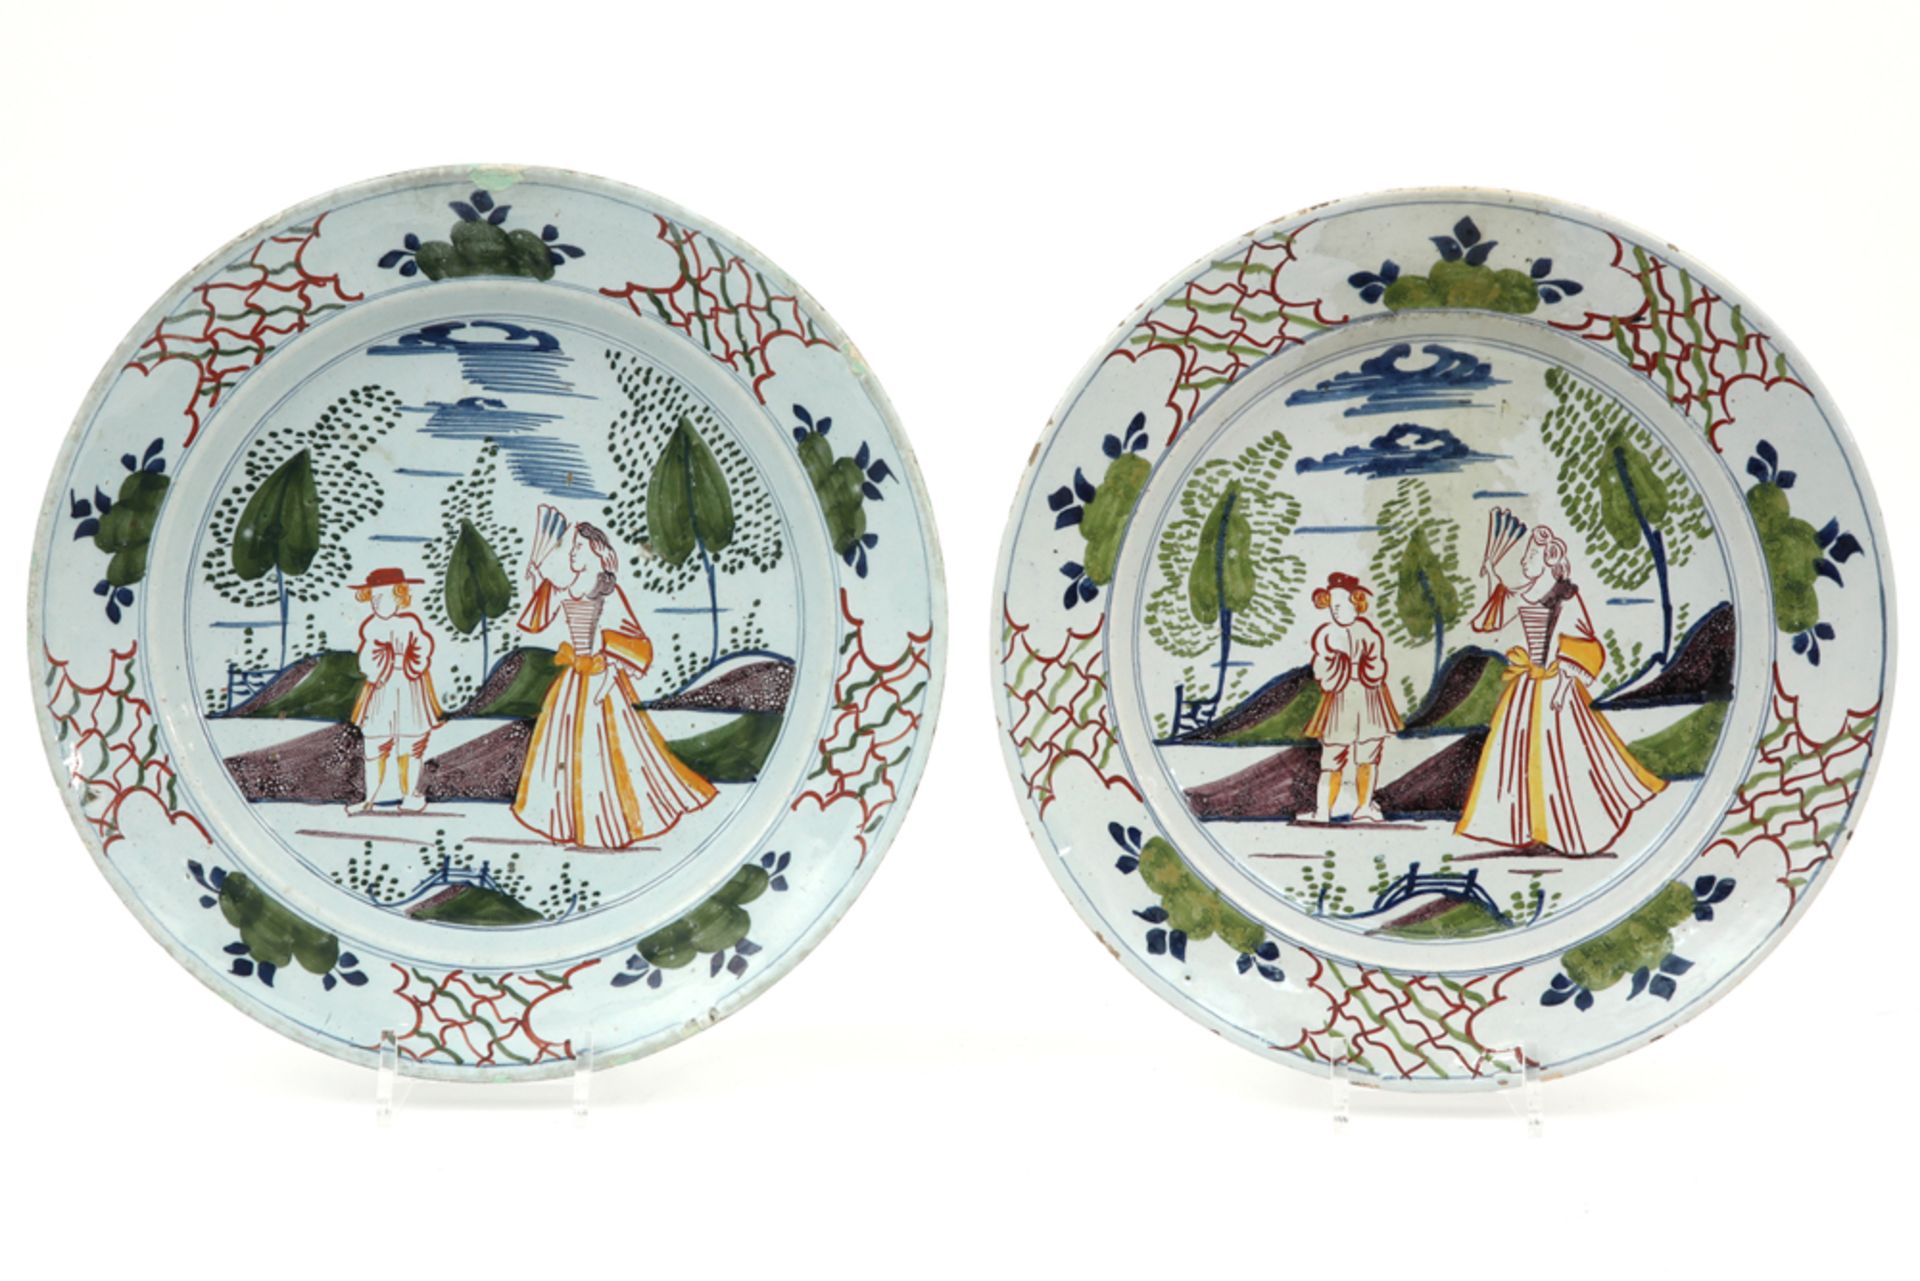 pair of 18th Cent. dishes in ceramic from Delft with a polychrome decor with a lady with fan and